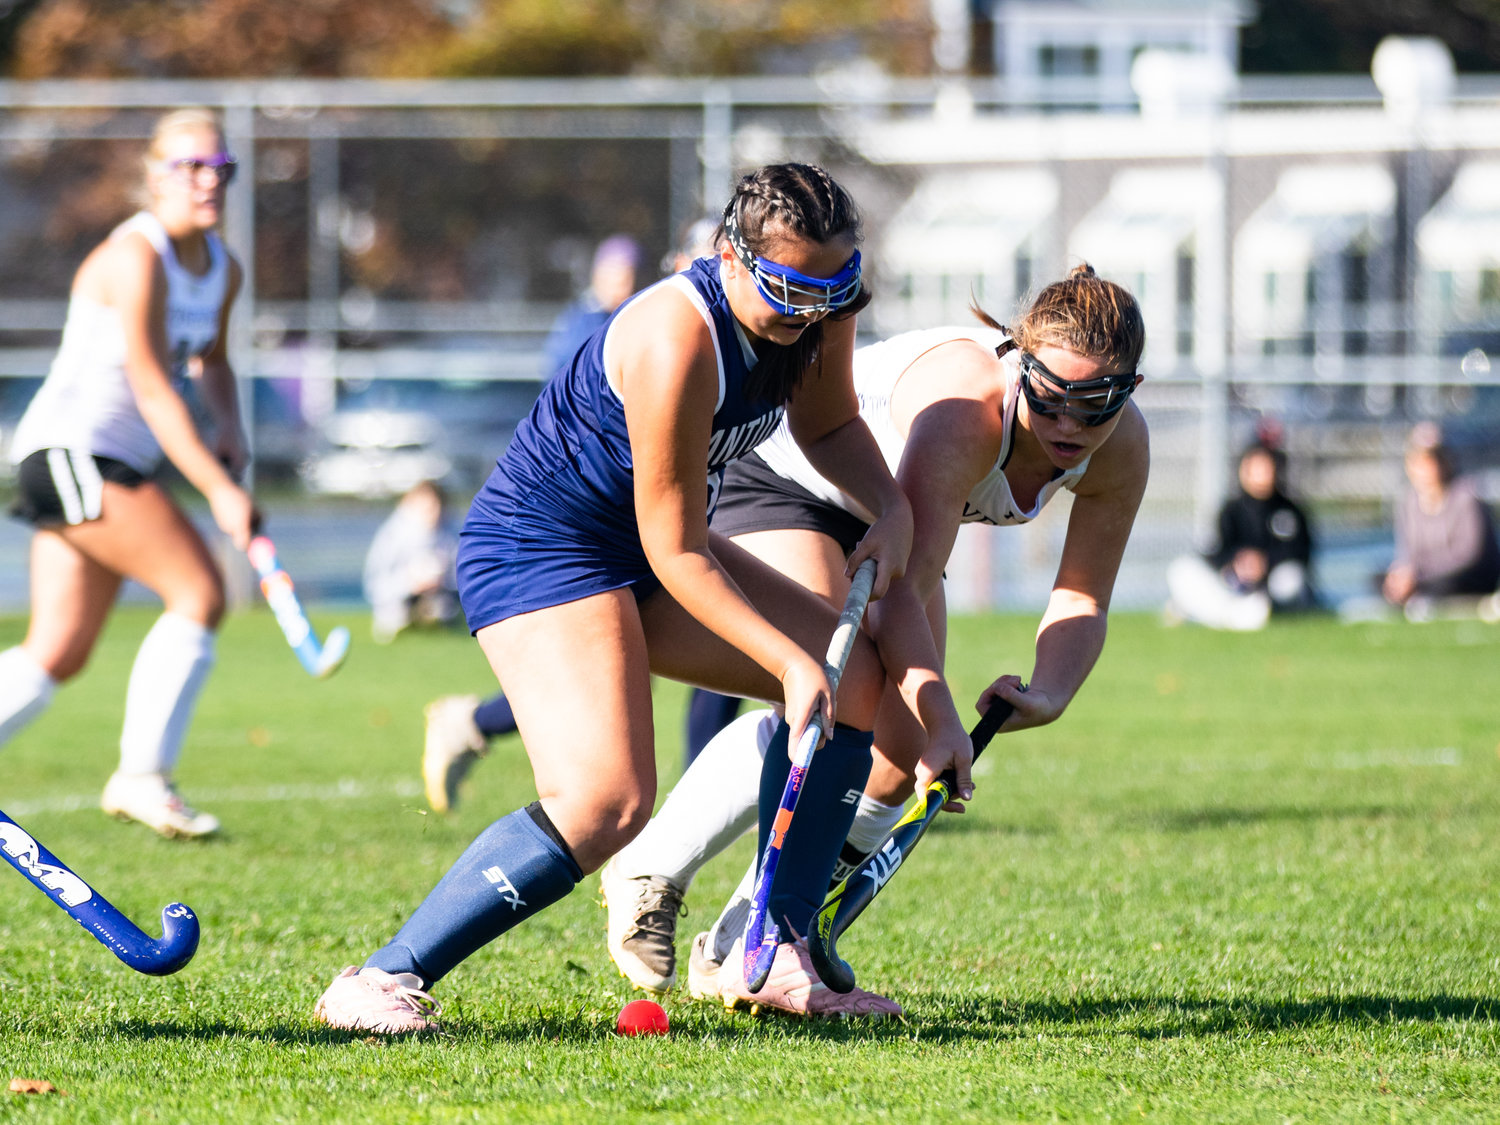 Lily Remick fights for the ball against the Vineyard.